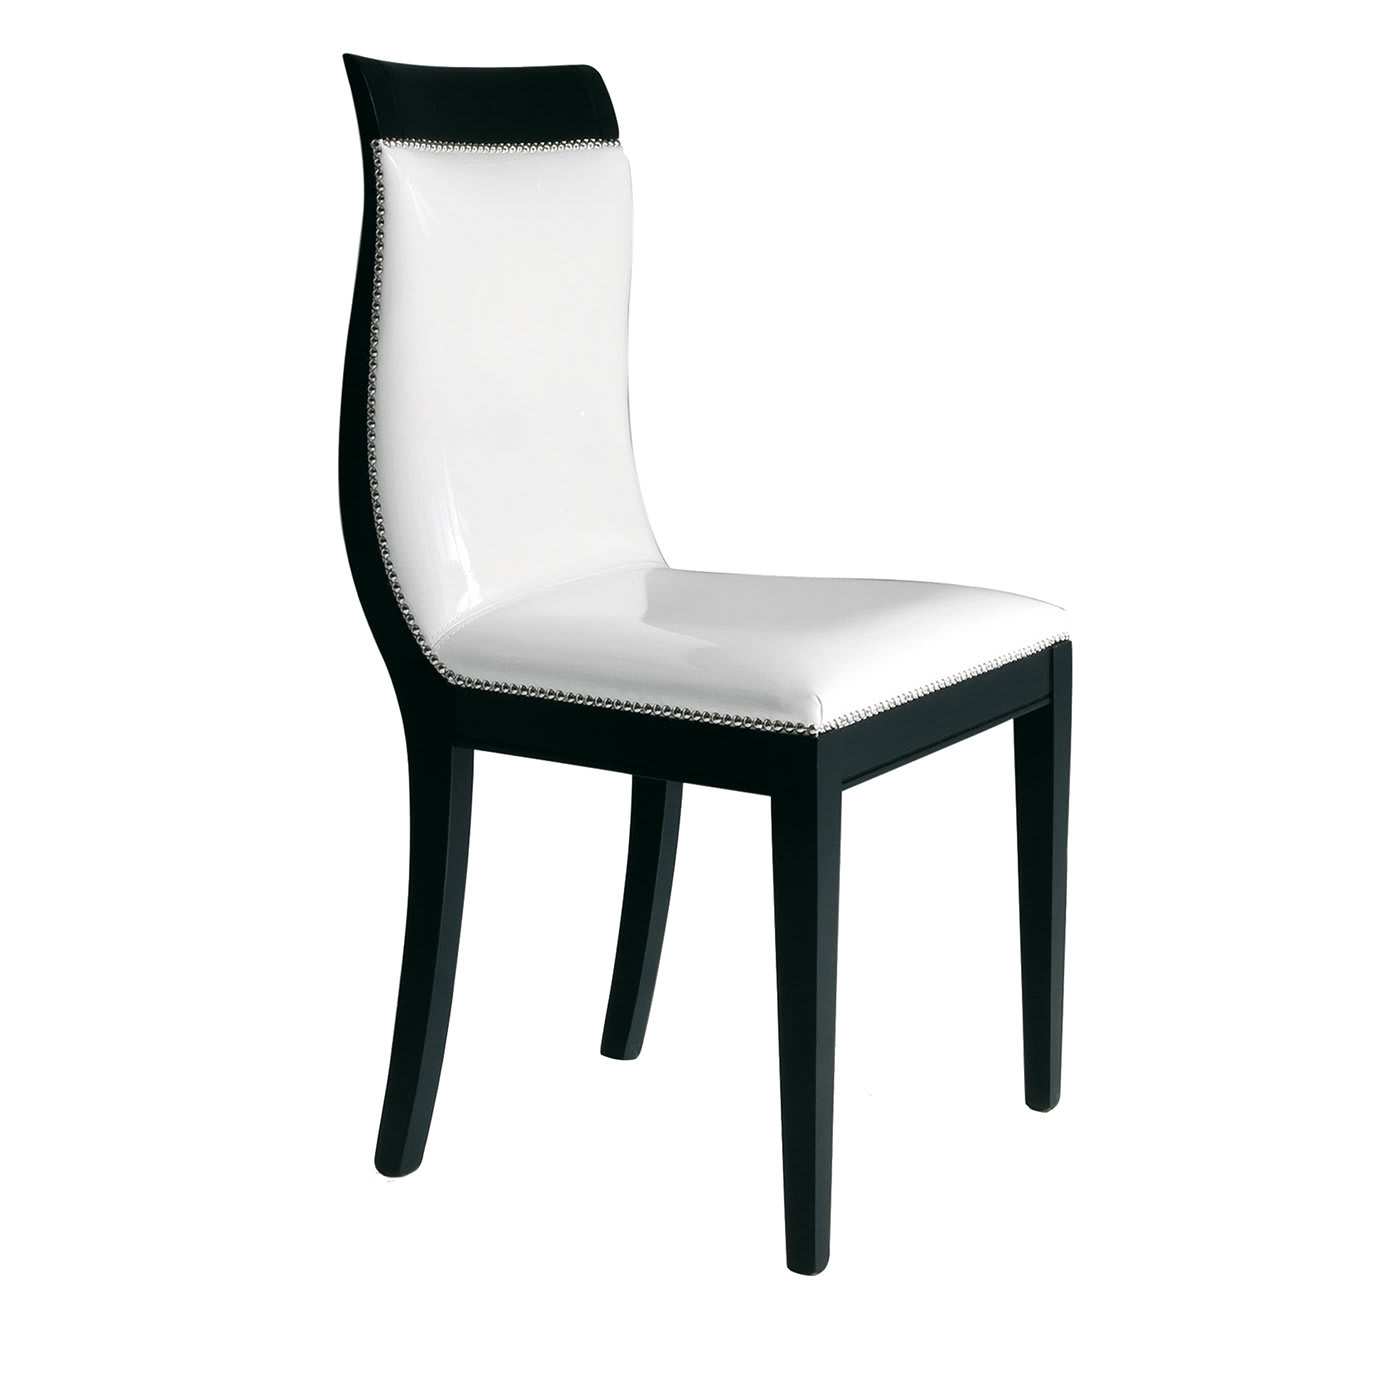 Set of 2 Black-And-White Chairs #2 - Palmobili